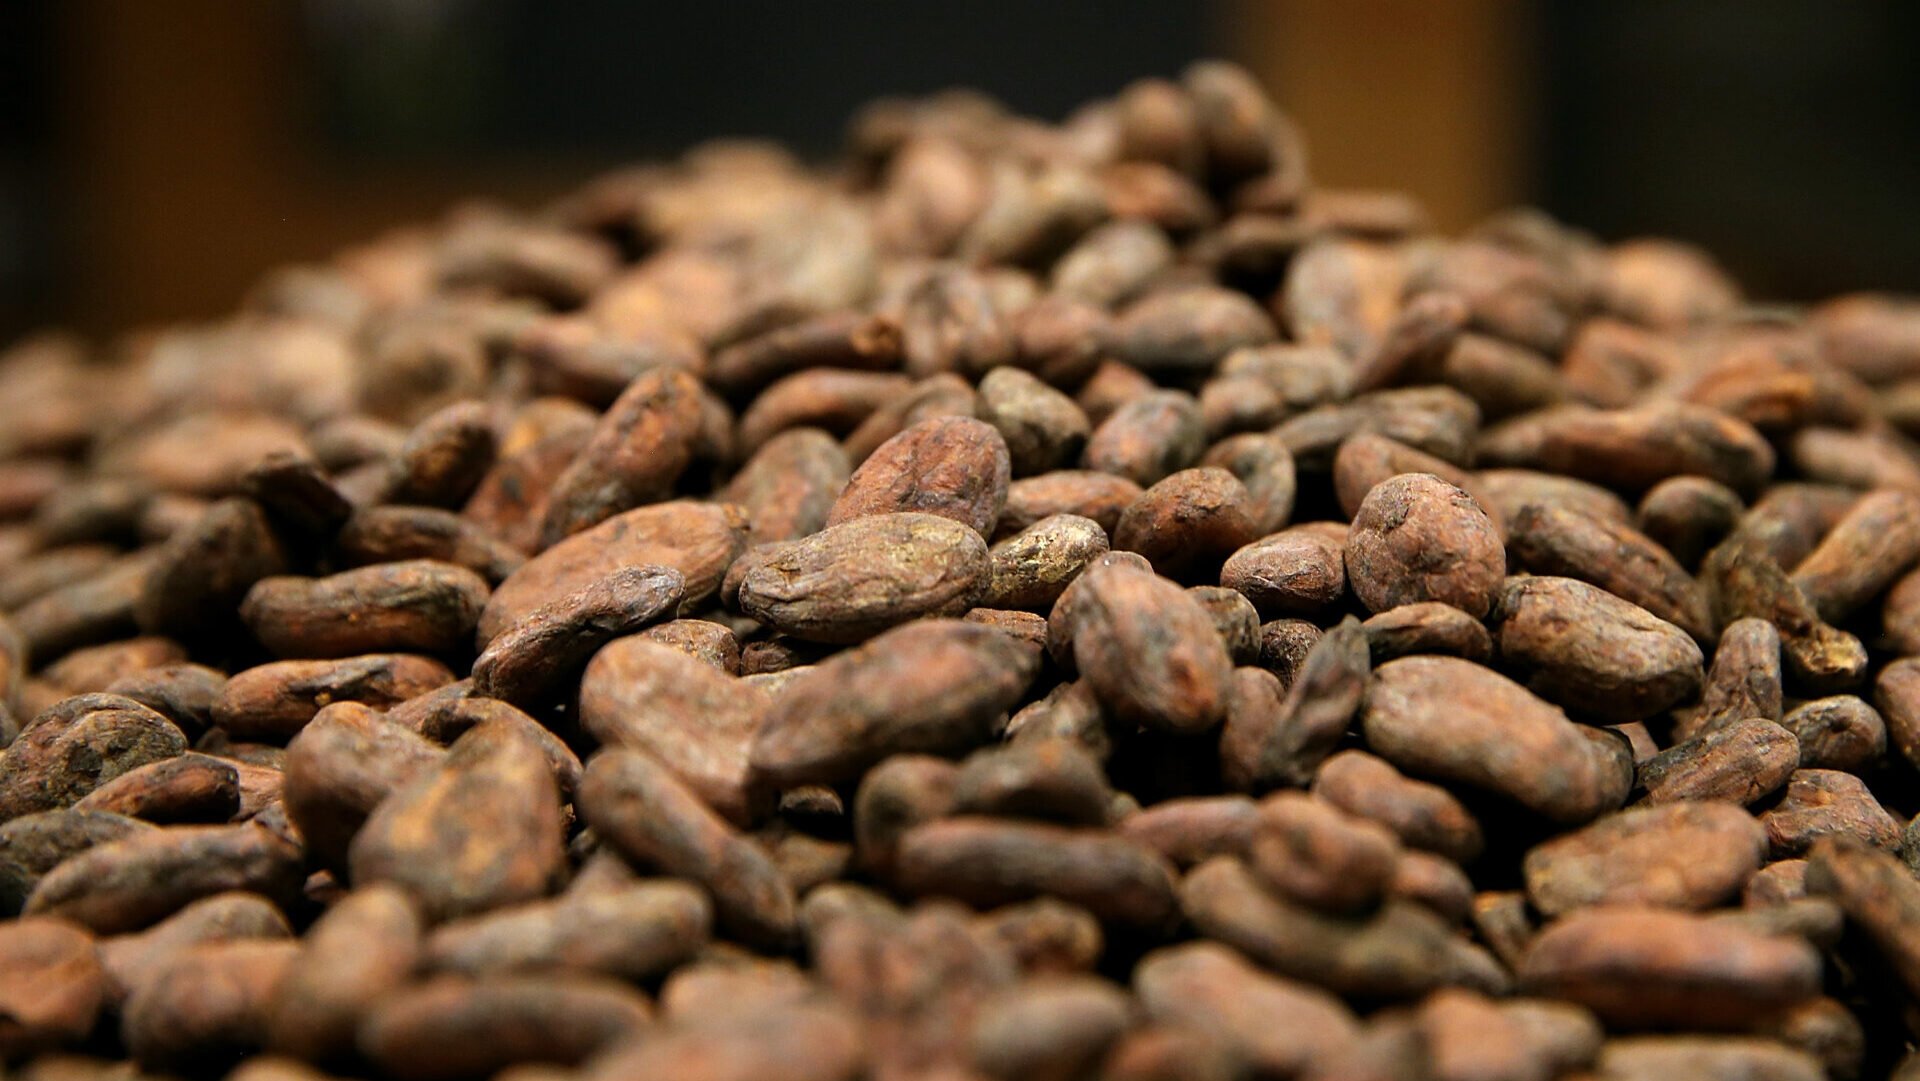 Lead Found in Nearly Half of Cocoa Products, New Study Warns